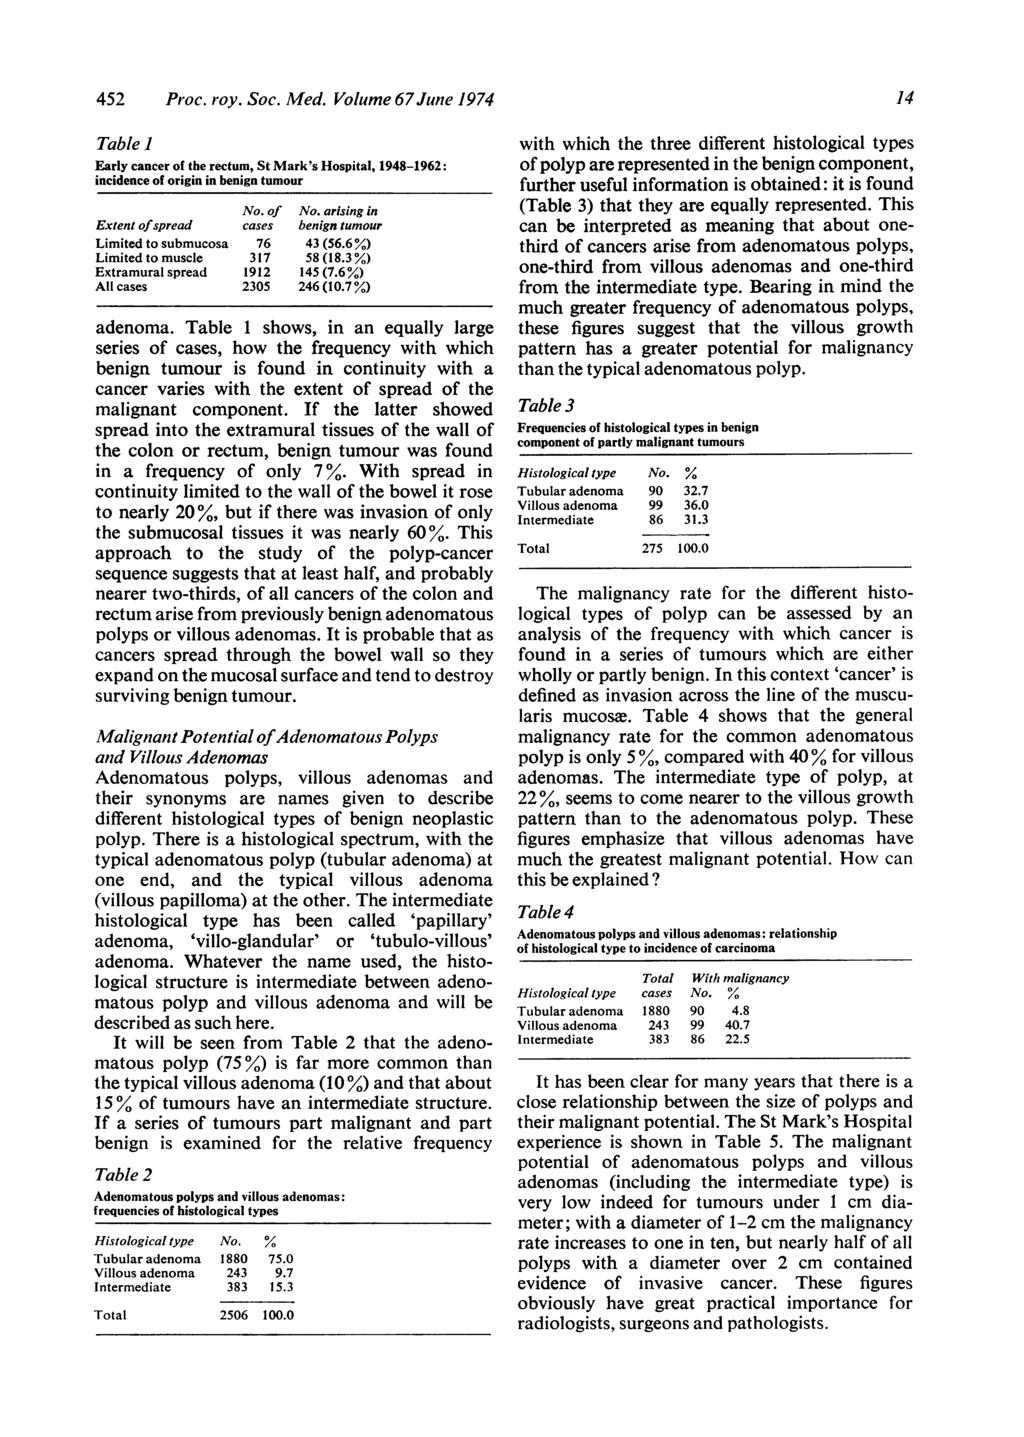 452 Proc. roy. Soc. Med. Volume 67 June 1974 Table 1 Early cancer of the rectum, St Mark's Hospital, 1948-1962: incidence of origin in benign tumour No. of No.